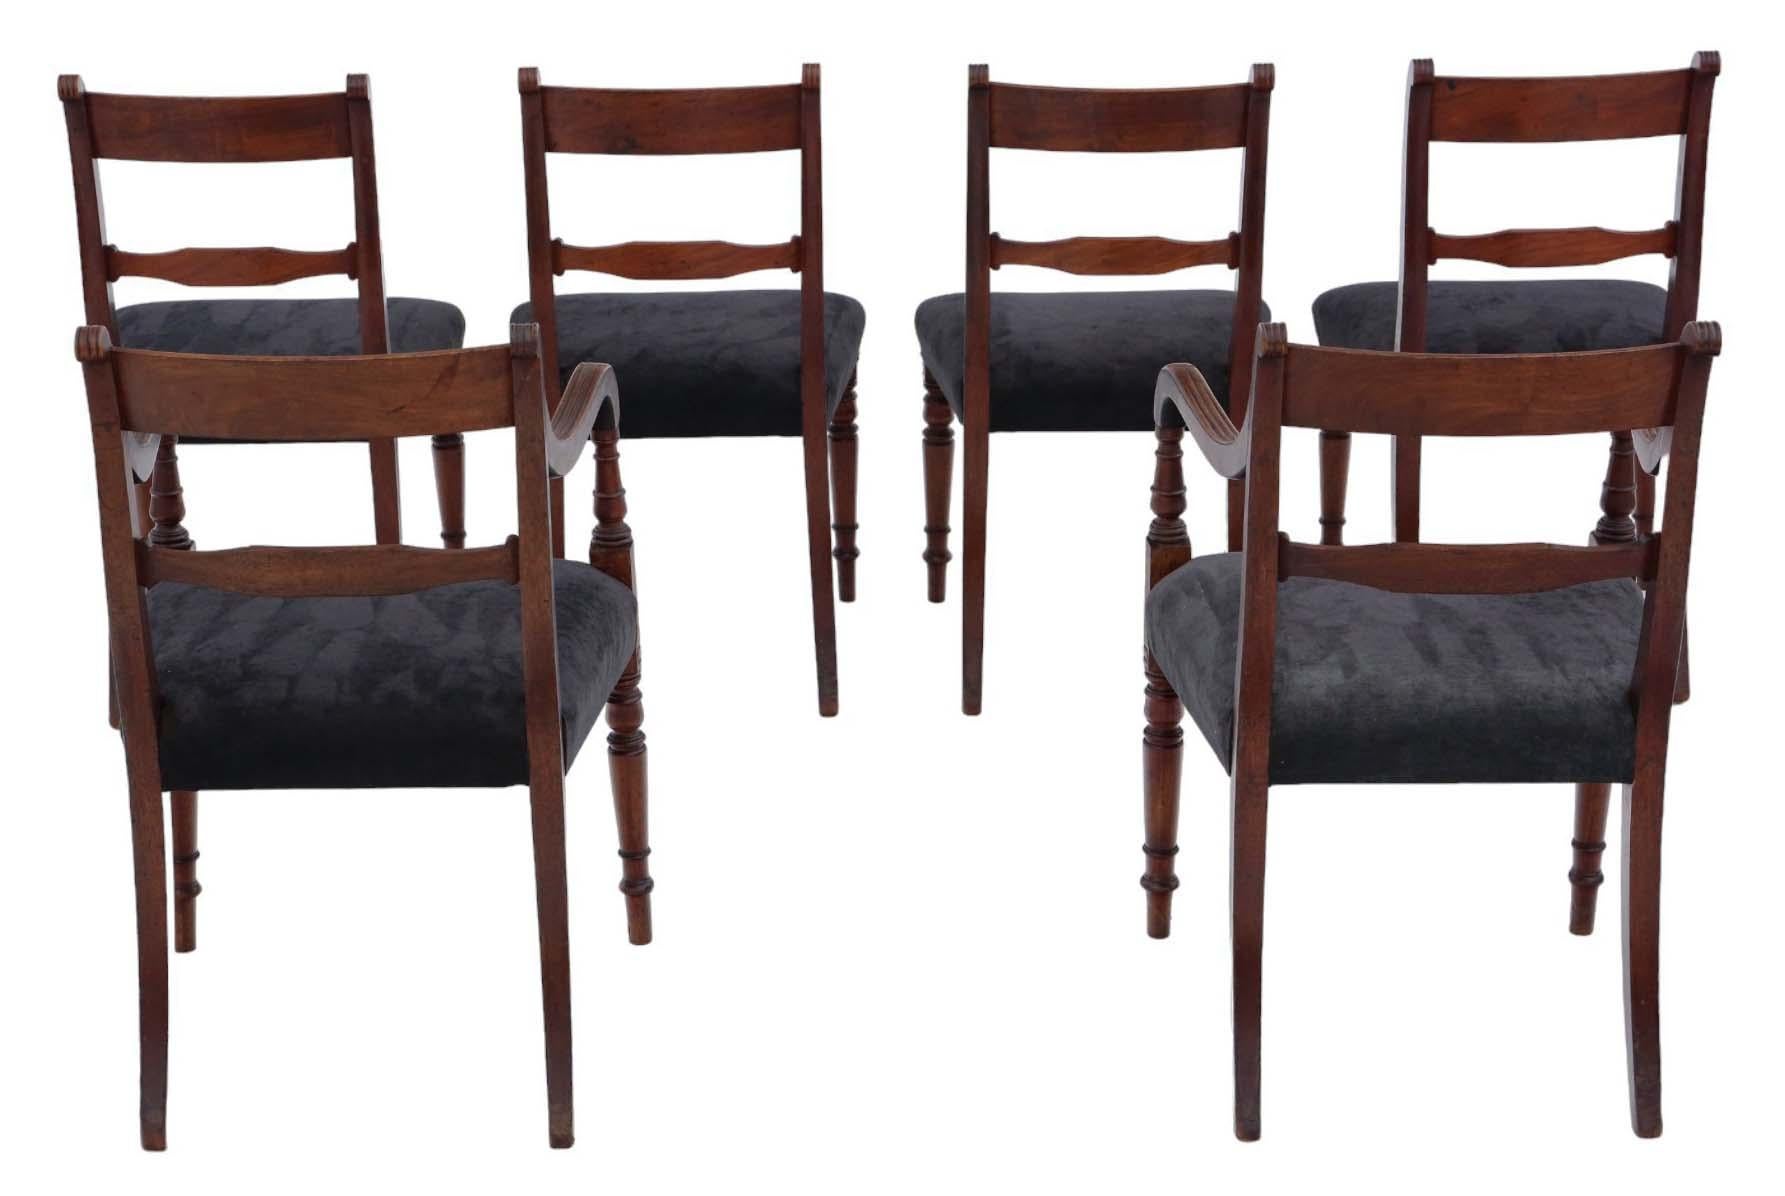 High-quality set of six (four regular and two carver) Georgian circa 1810 mahogany dining chairs, boasting an antique charm.

Robust construction with sturdy joints and free from woodworm damage.

Recently upholstered in elegant black velour,